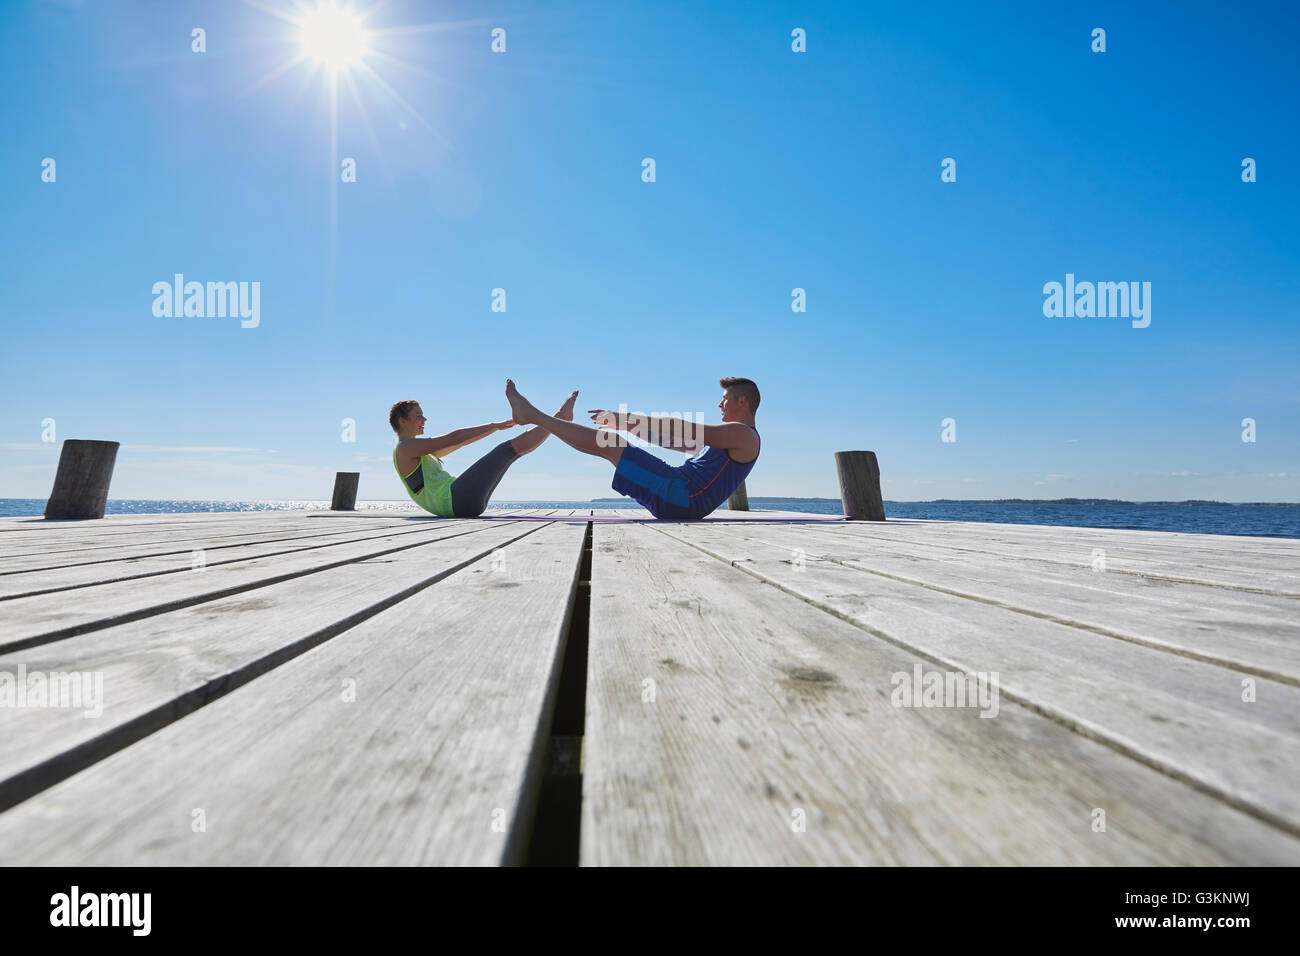 Mid distance view of couple on pier face to face doing sit ups Stock Photo